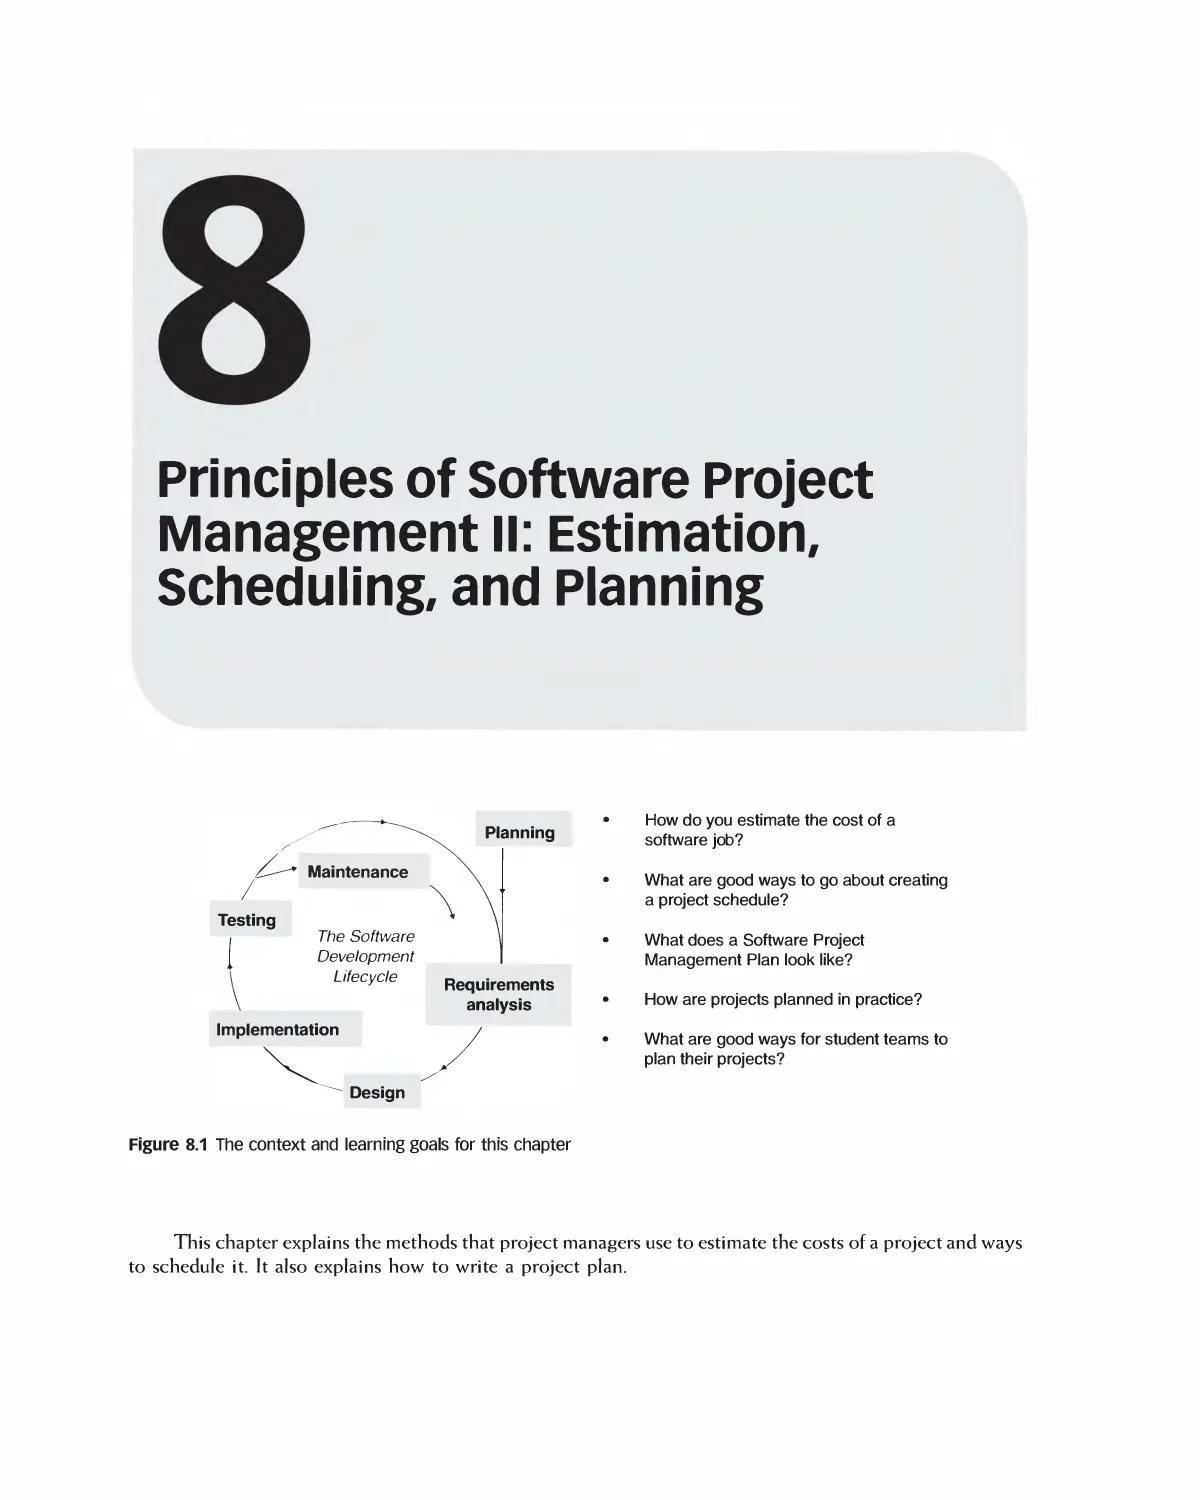 Chapter 8: Principles of Software Project Management II: Estimation, Scheduling, and Planning